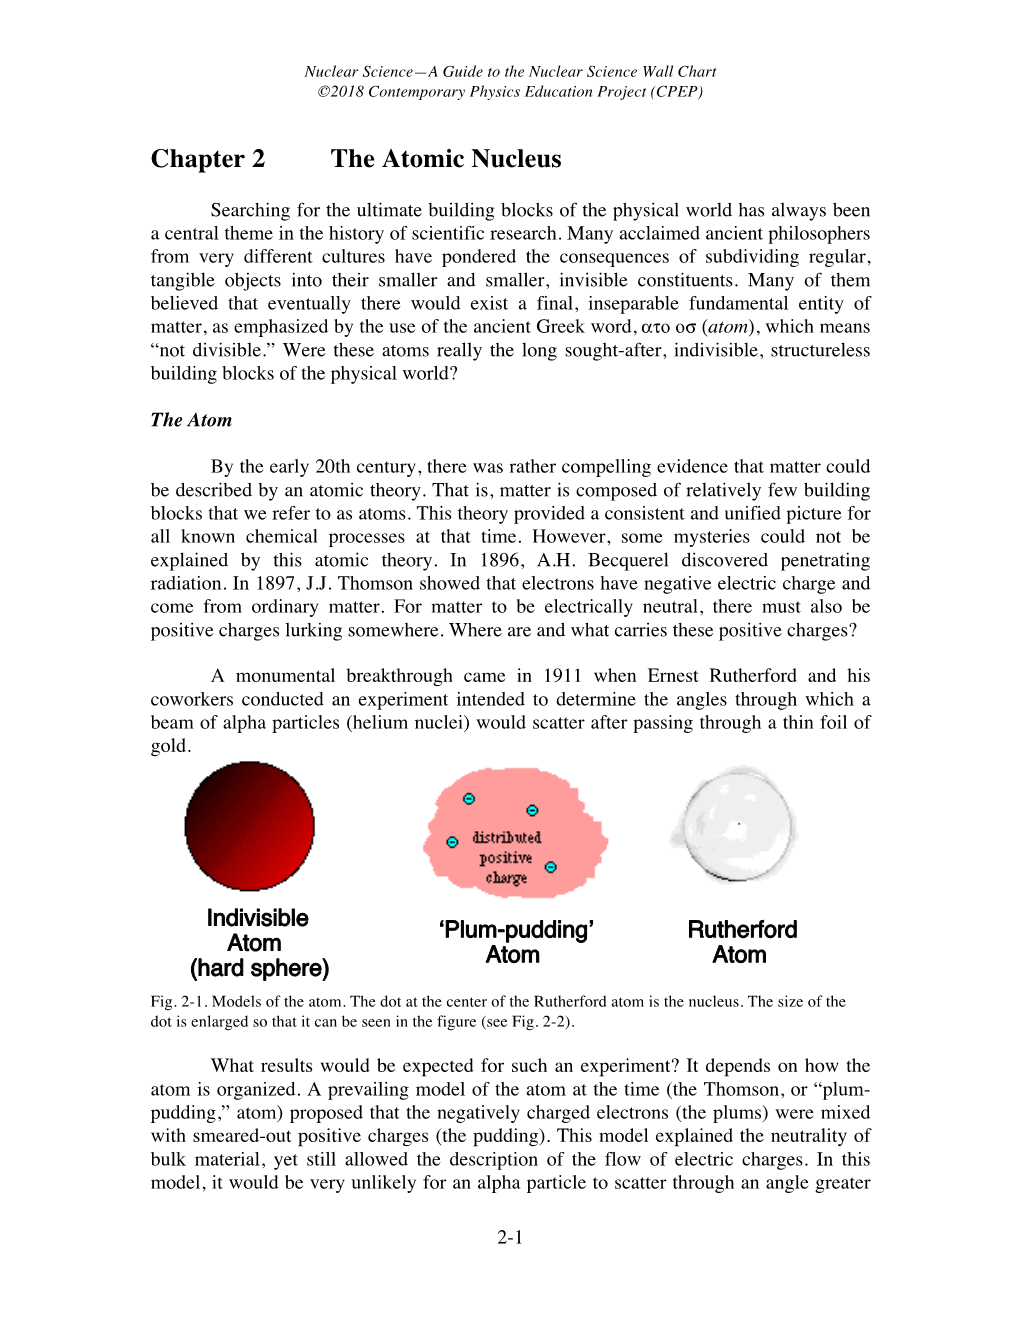 Chapter 2 the Atomic Nucleus